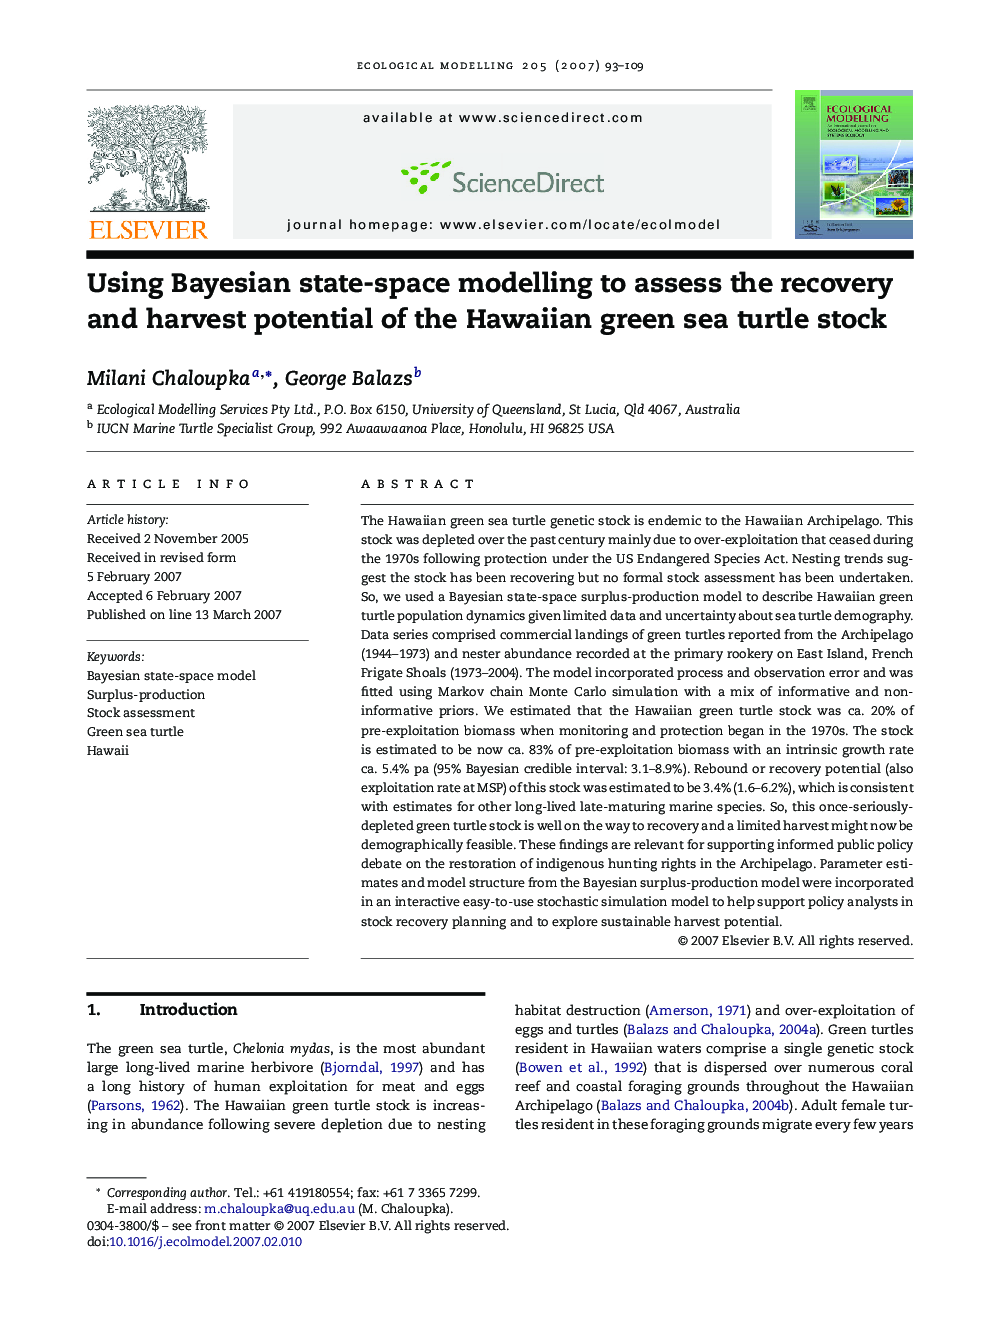 Using Bayesian state-space modelling to assess the recovery and harvest potential of the Hawaiian green sea turtle stock